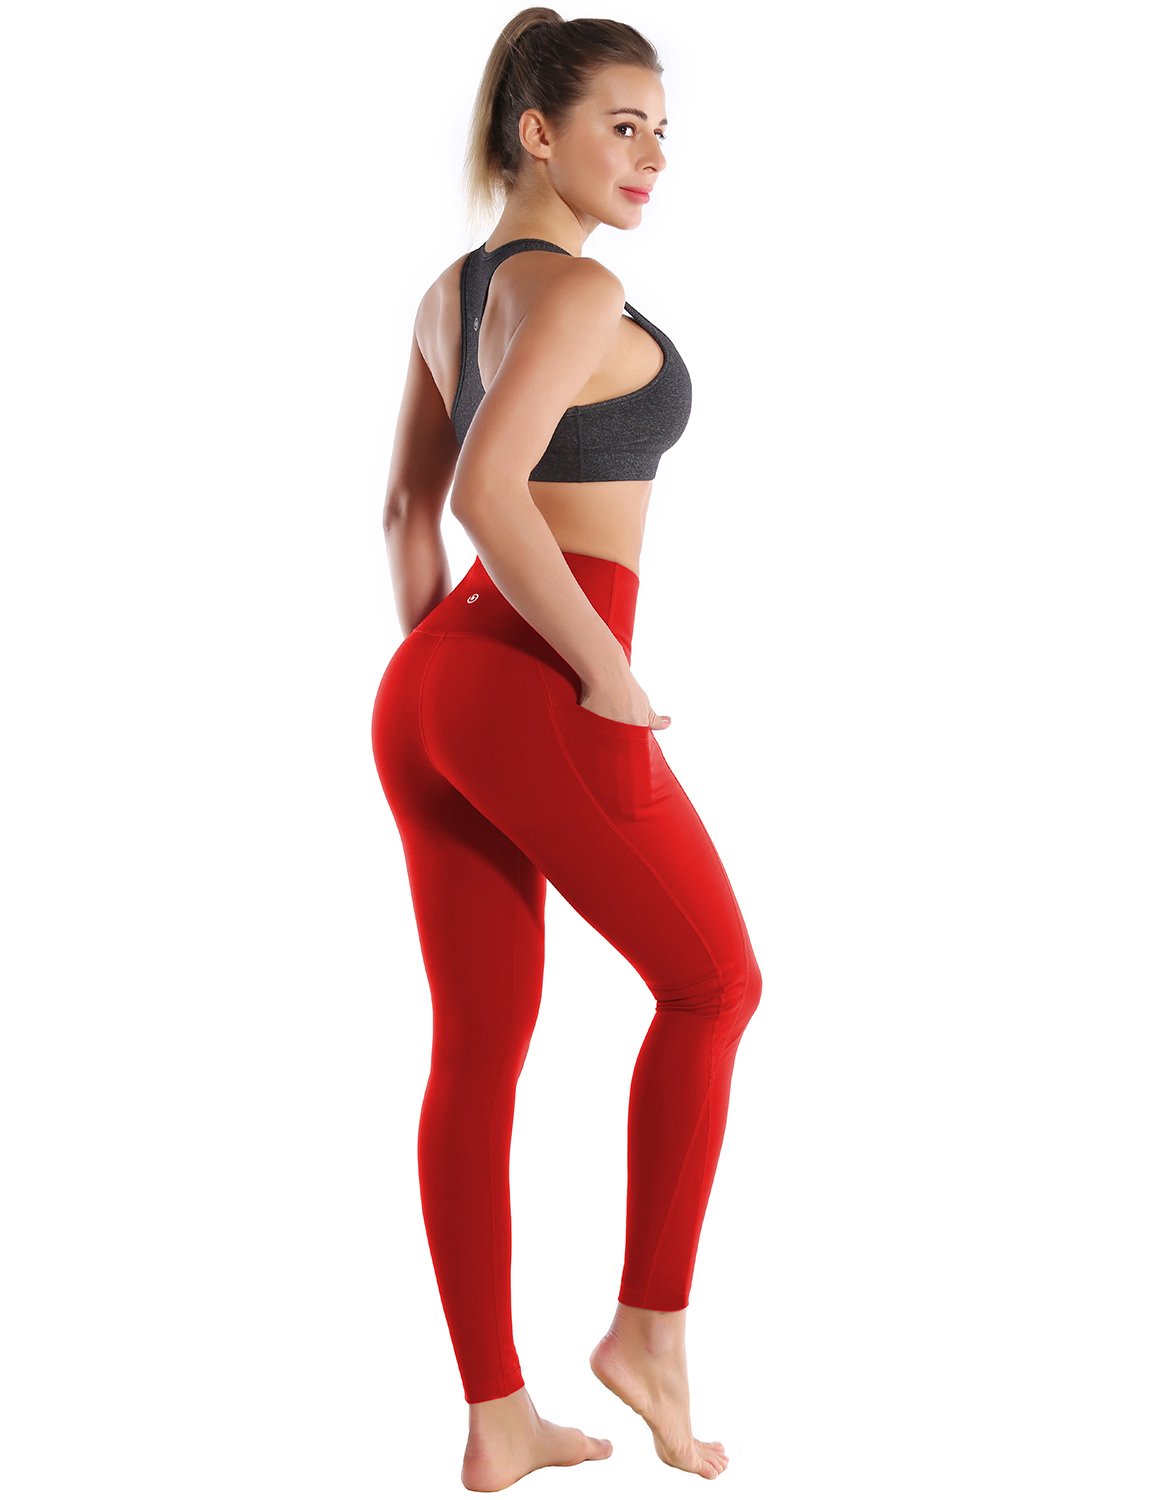 High Waist Side Pockets Running Pants scarlet 75% Nylon, 25% Spandex Fabric doesn't attract lint easily 4-way stretch No see-through Moisture-wicking Tummy control Inner pocket